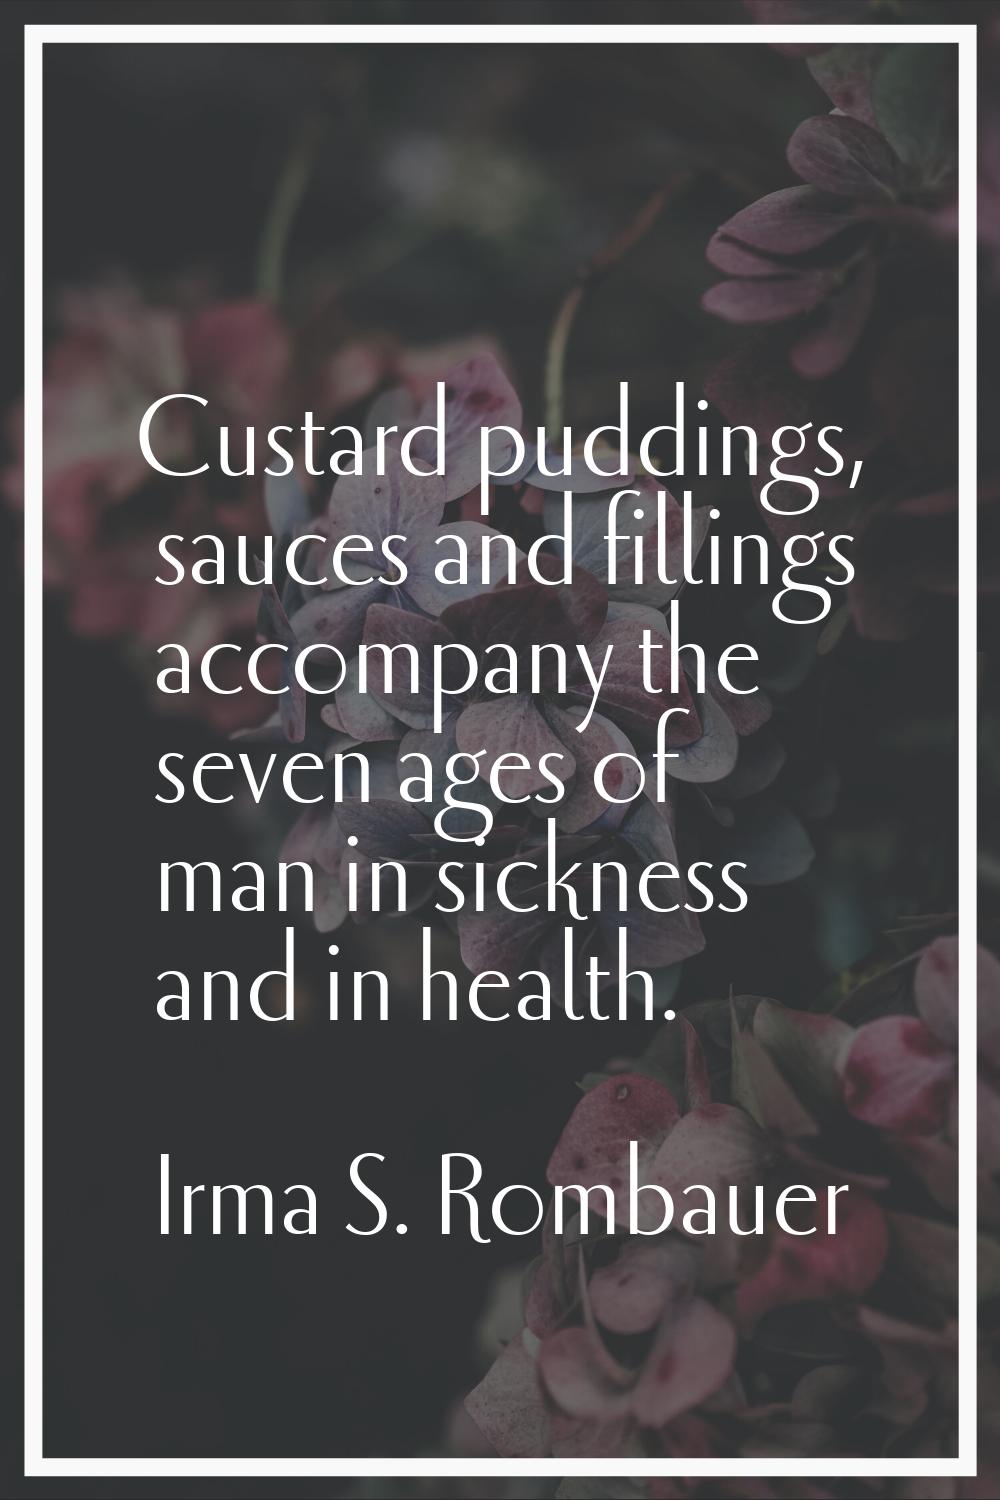 Custard puddings, sauces and fillings accompany the seven ages of man in sickness and in health.